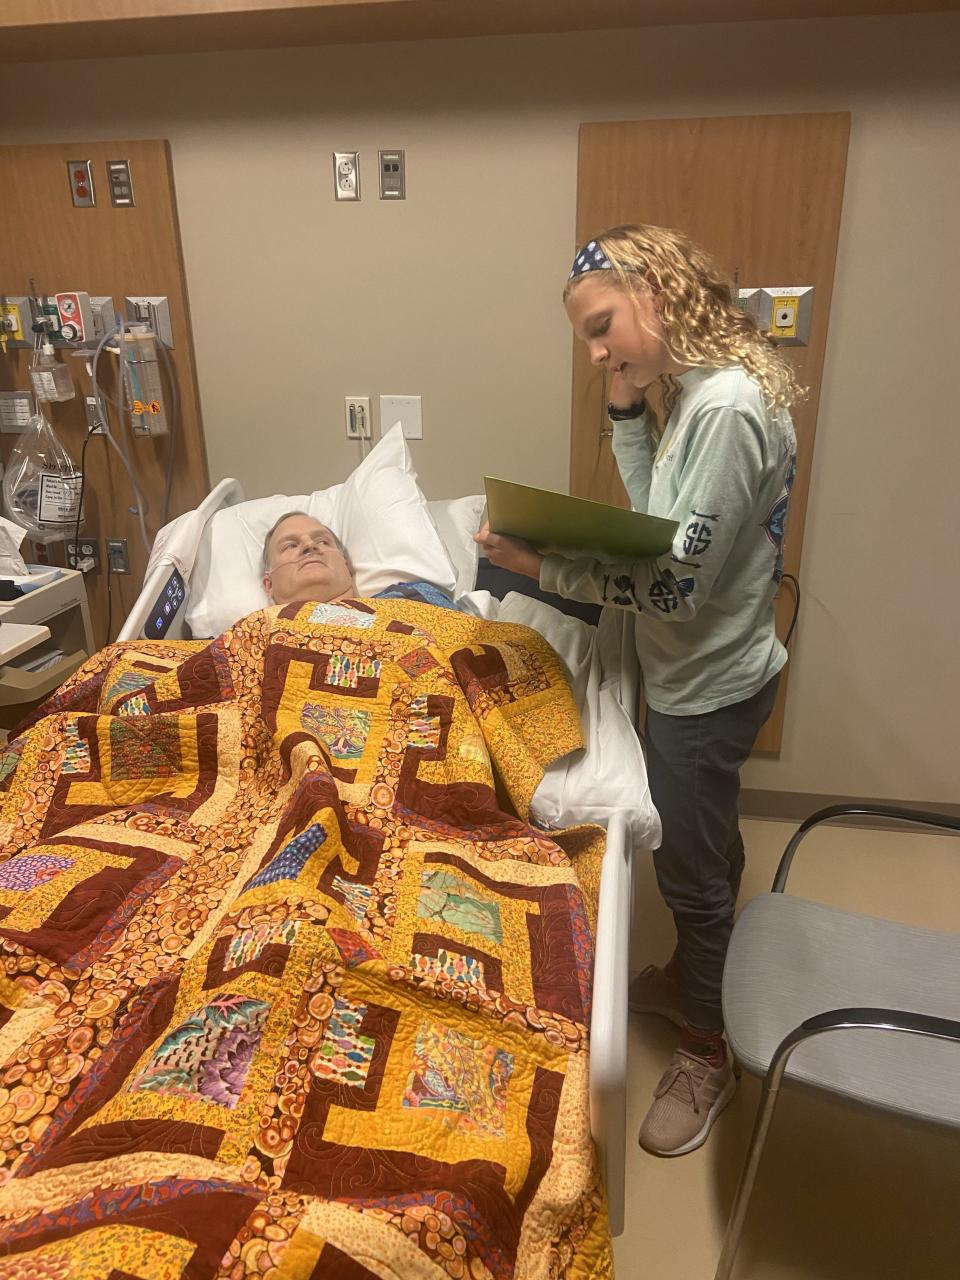 Grace Kolb reads a poem she wrote for her father, Jason Kolb, during his rehabilitation at a hospital in Colorado. Jason Kolb was paralyzed from the waist down in a skiing accident in January 2023.